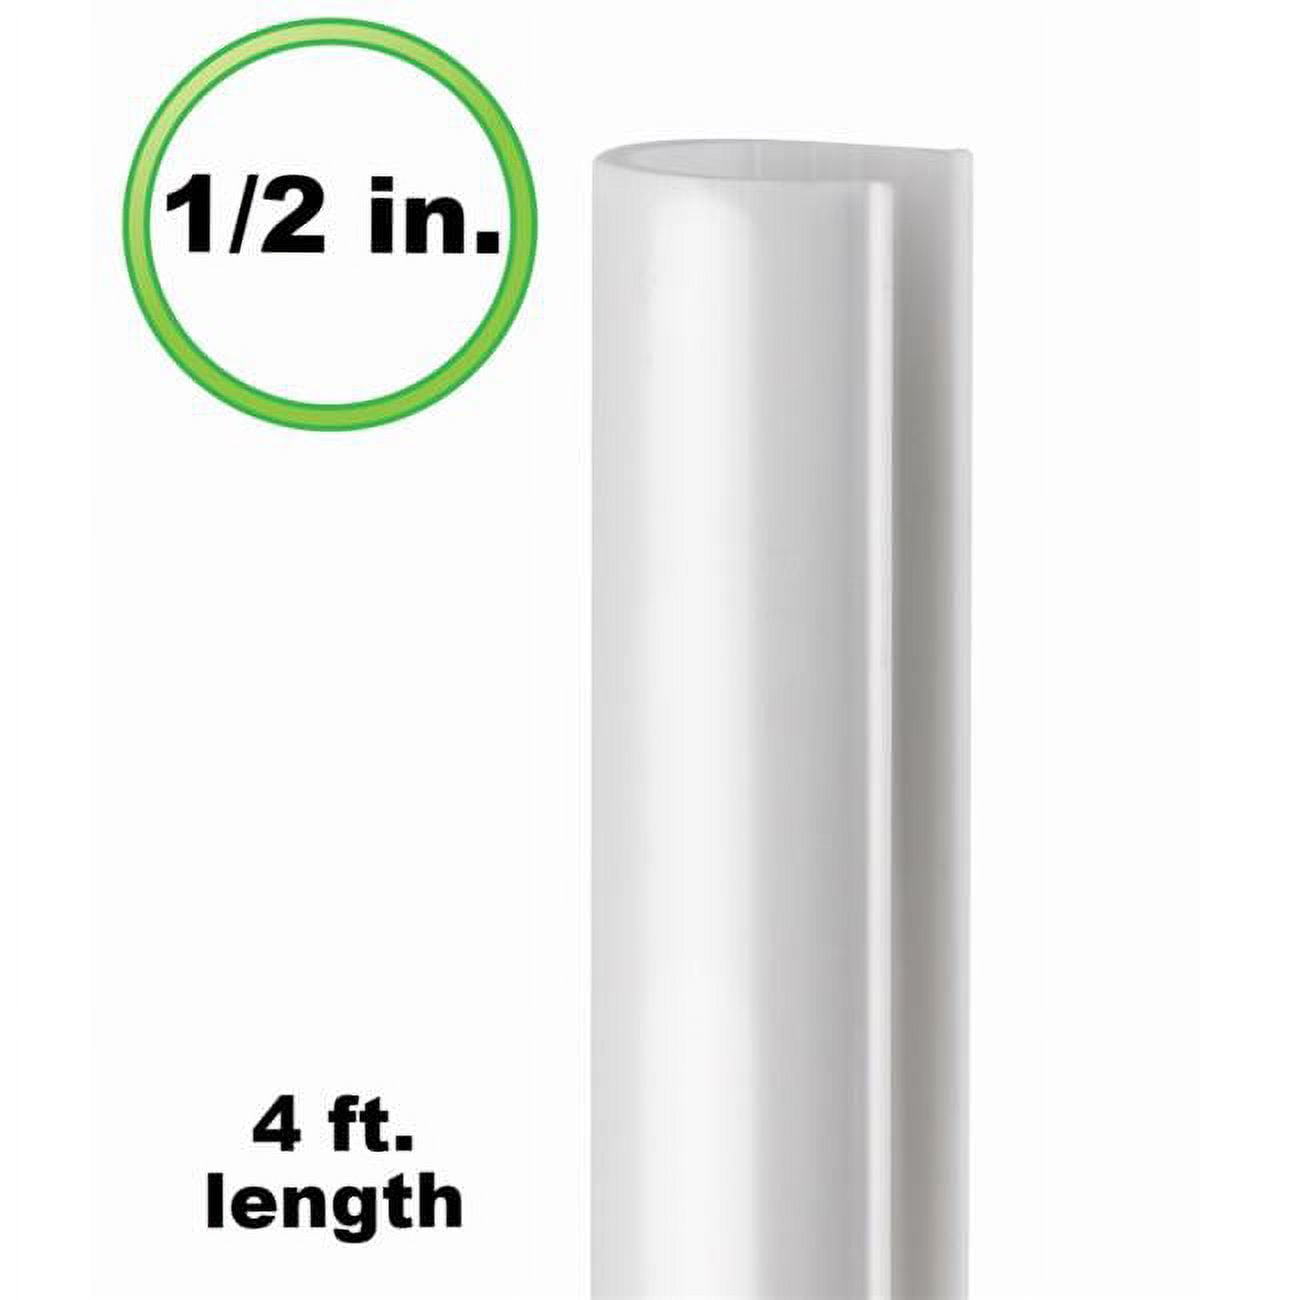 01-ez 4 Ft. X 0.5 In. Snap Clamp Abs For 0.5 In. Pvc Pipe - Light Grip